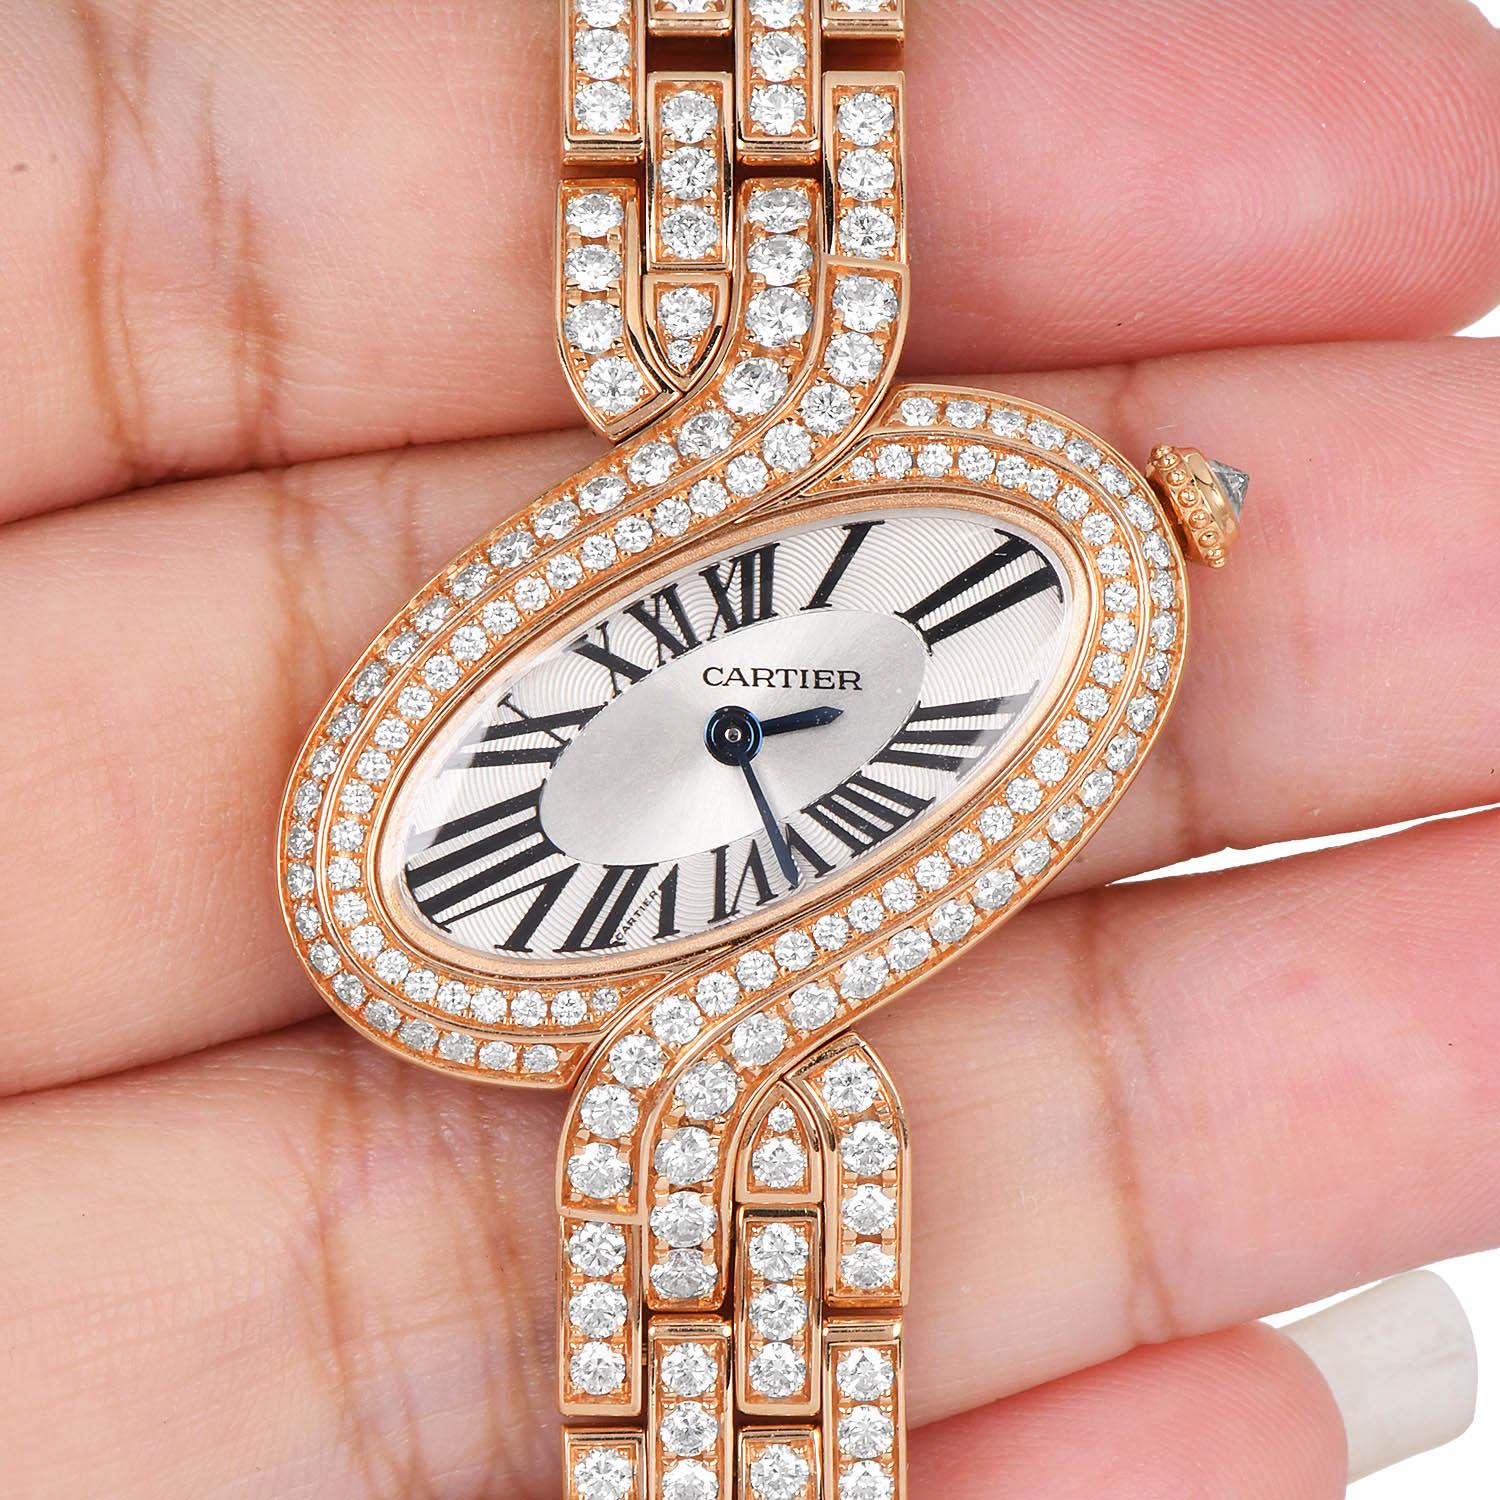 Cartier Delices Pink Gold Diamond -Set Bracelet Watch ref 3382 In Excellent Condition For Sale In Miami, FL